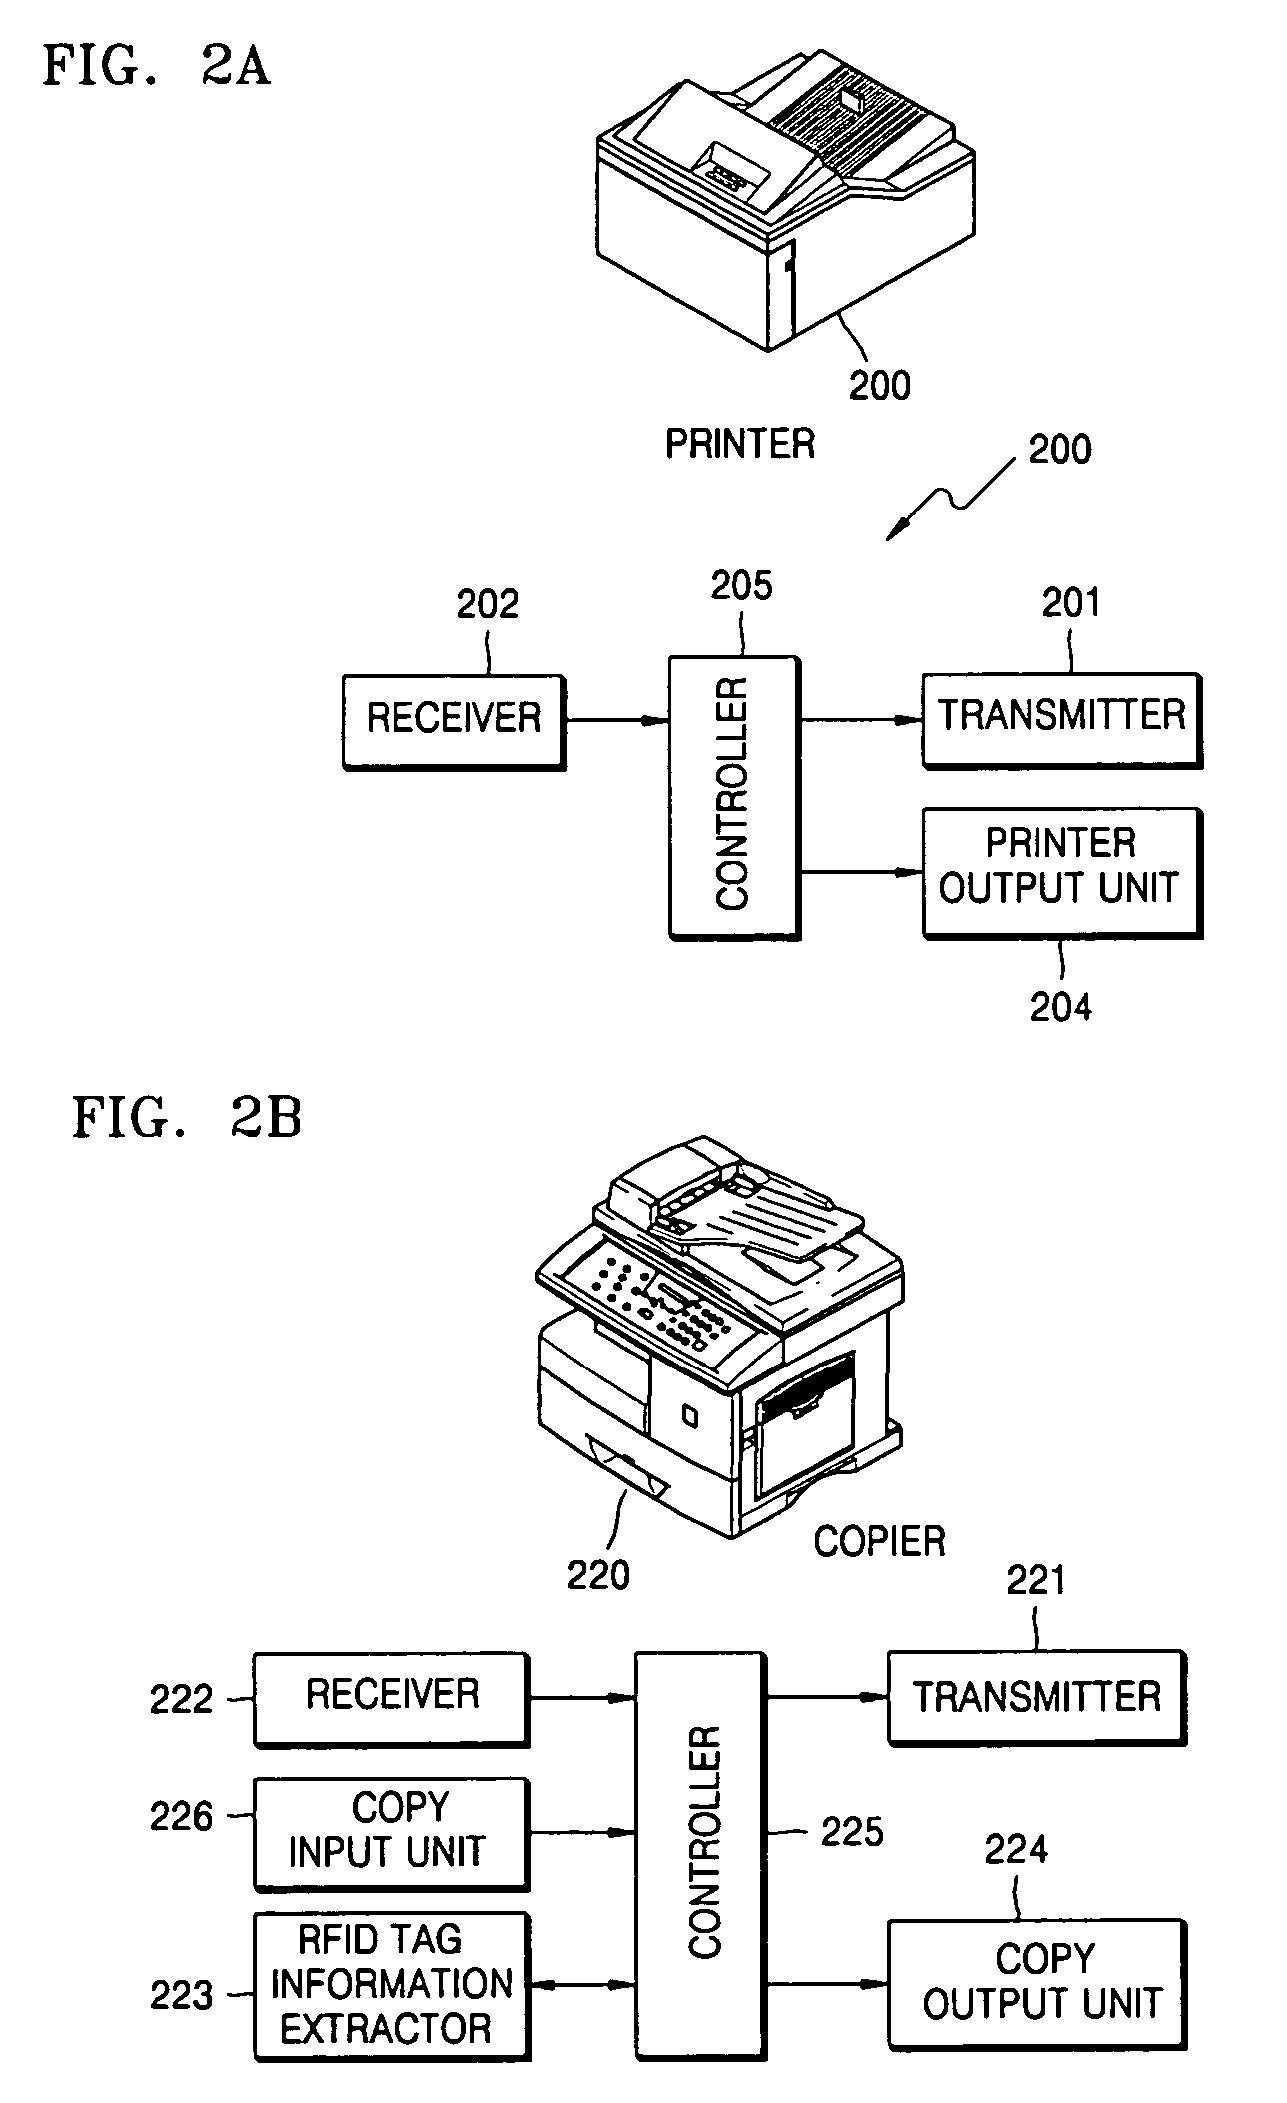 Method and apparatus for managing online and offline documents with RFID technology